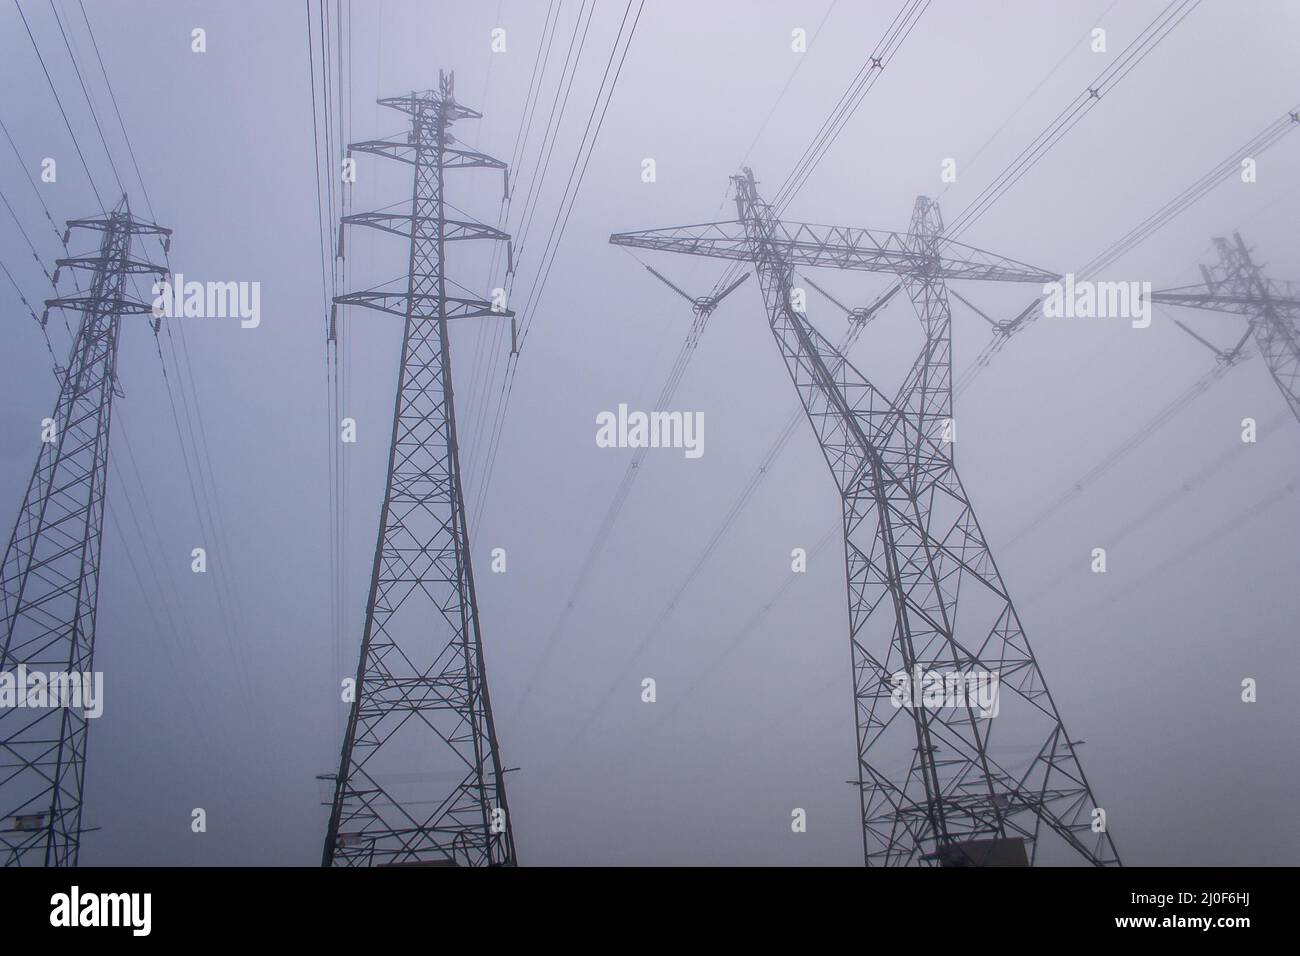 Towering electrical power pylons disappearing into thick fog landscape Stock Photo